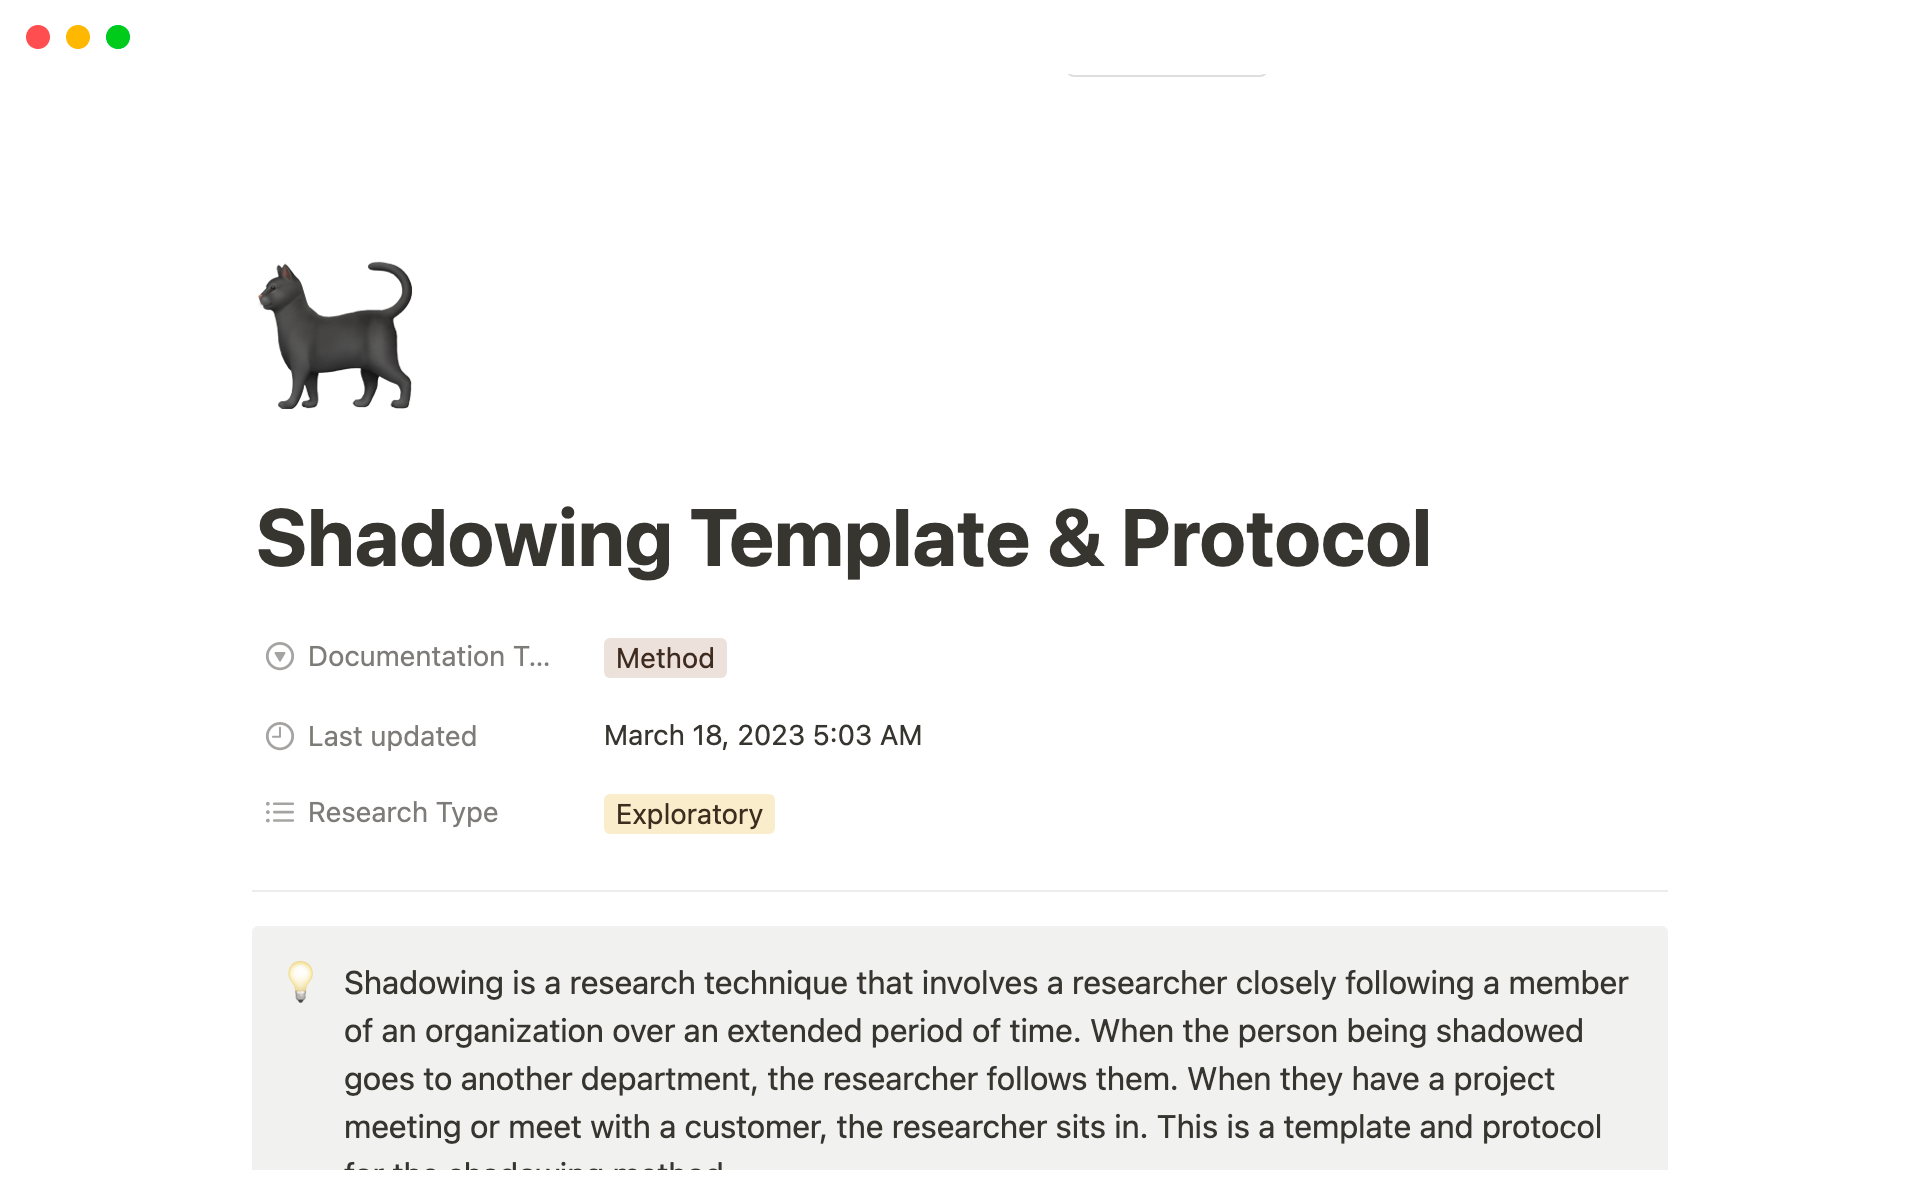 This template will help UX Researcher set up and plan for a shadowing method as part of their research project